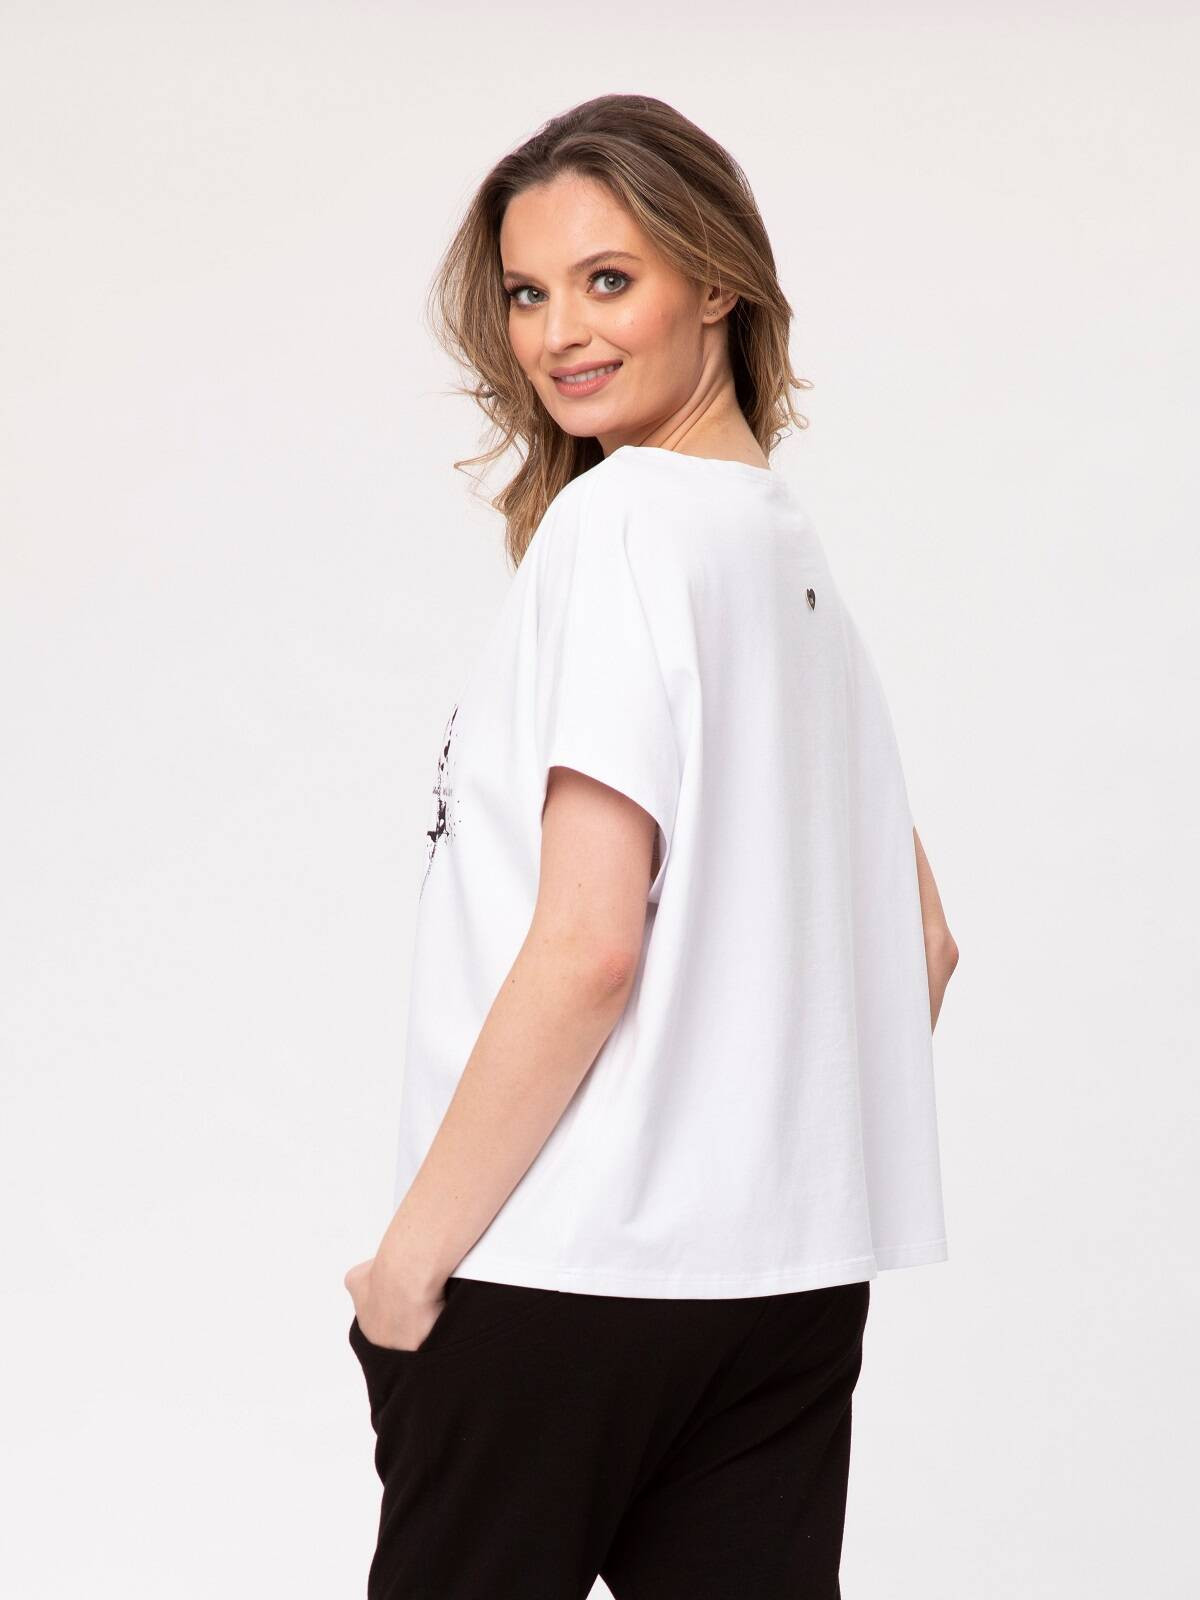 Tshirt 114 model 16680274 White XL/XXL White - LOOK MADE WITH LOVE